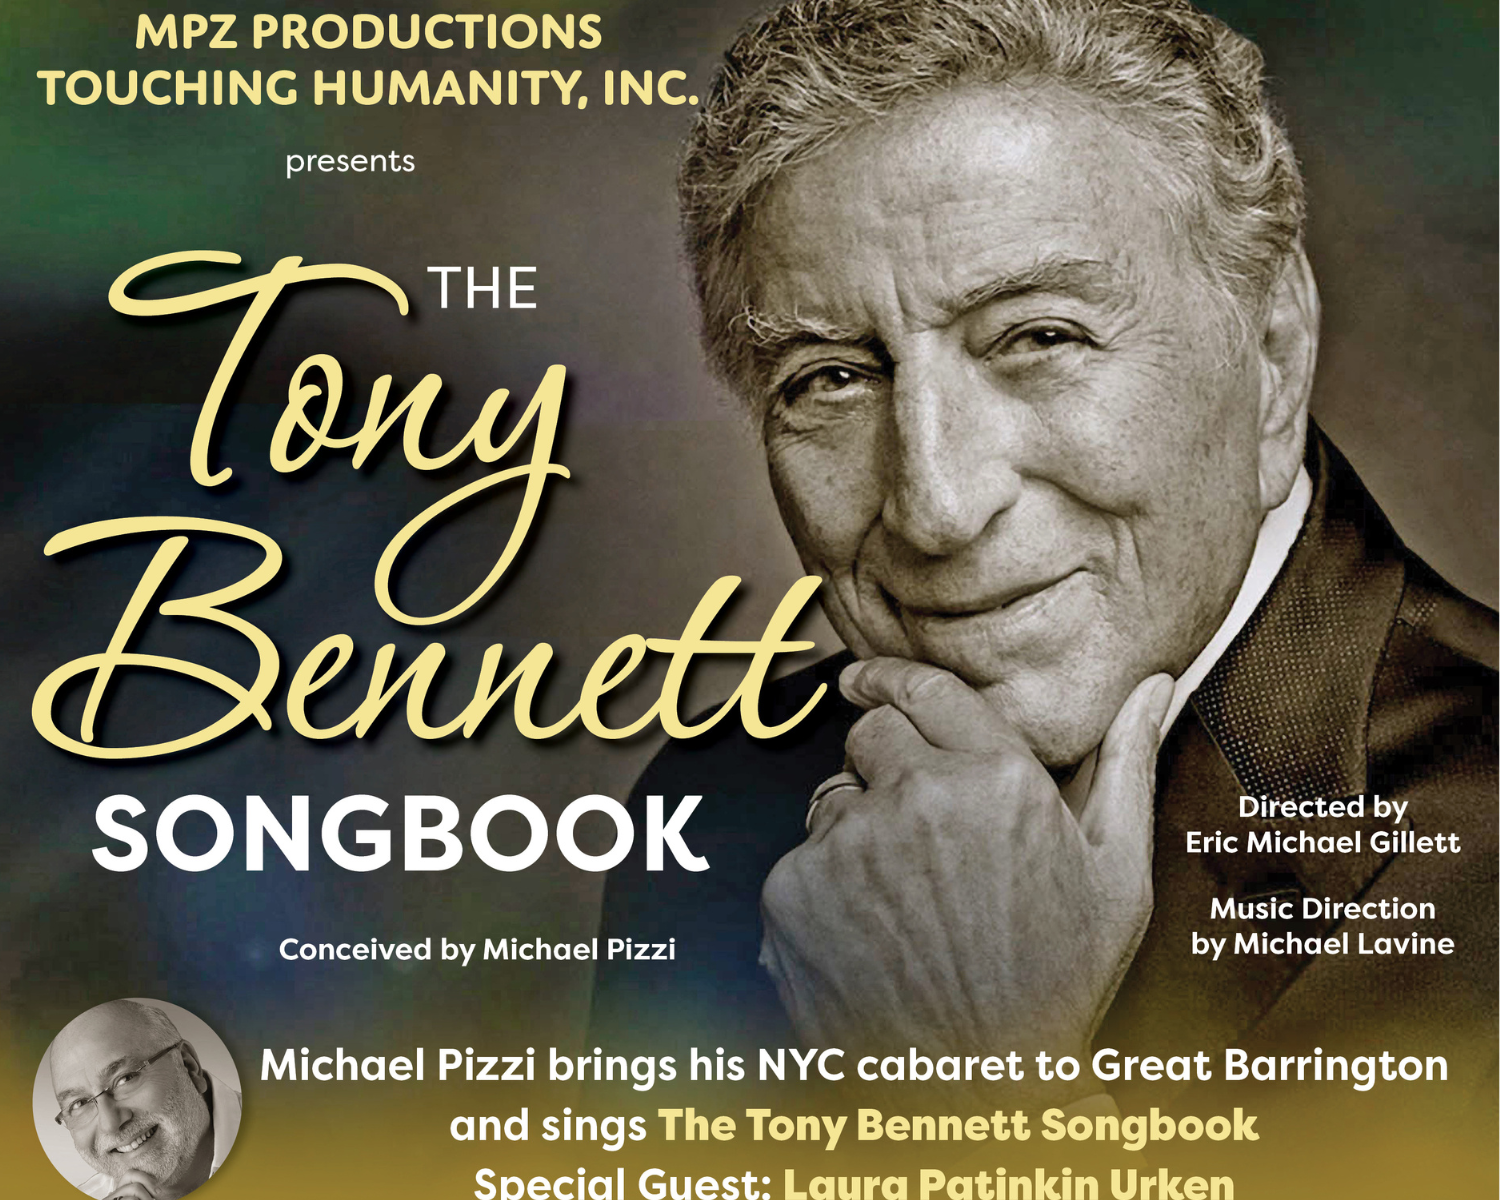 MPZ Productions: The Tony Bennett Songbook